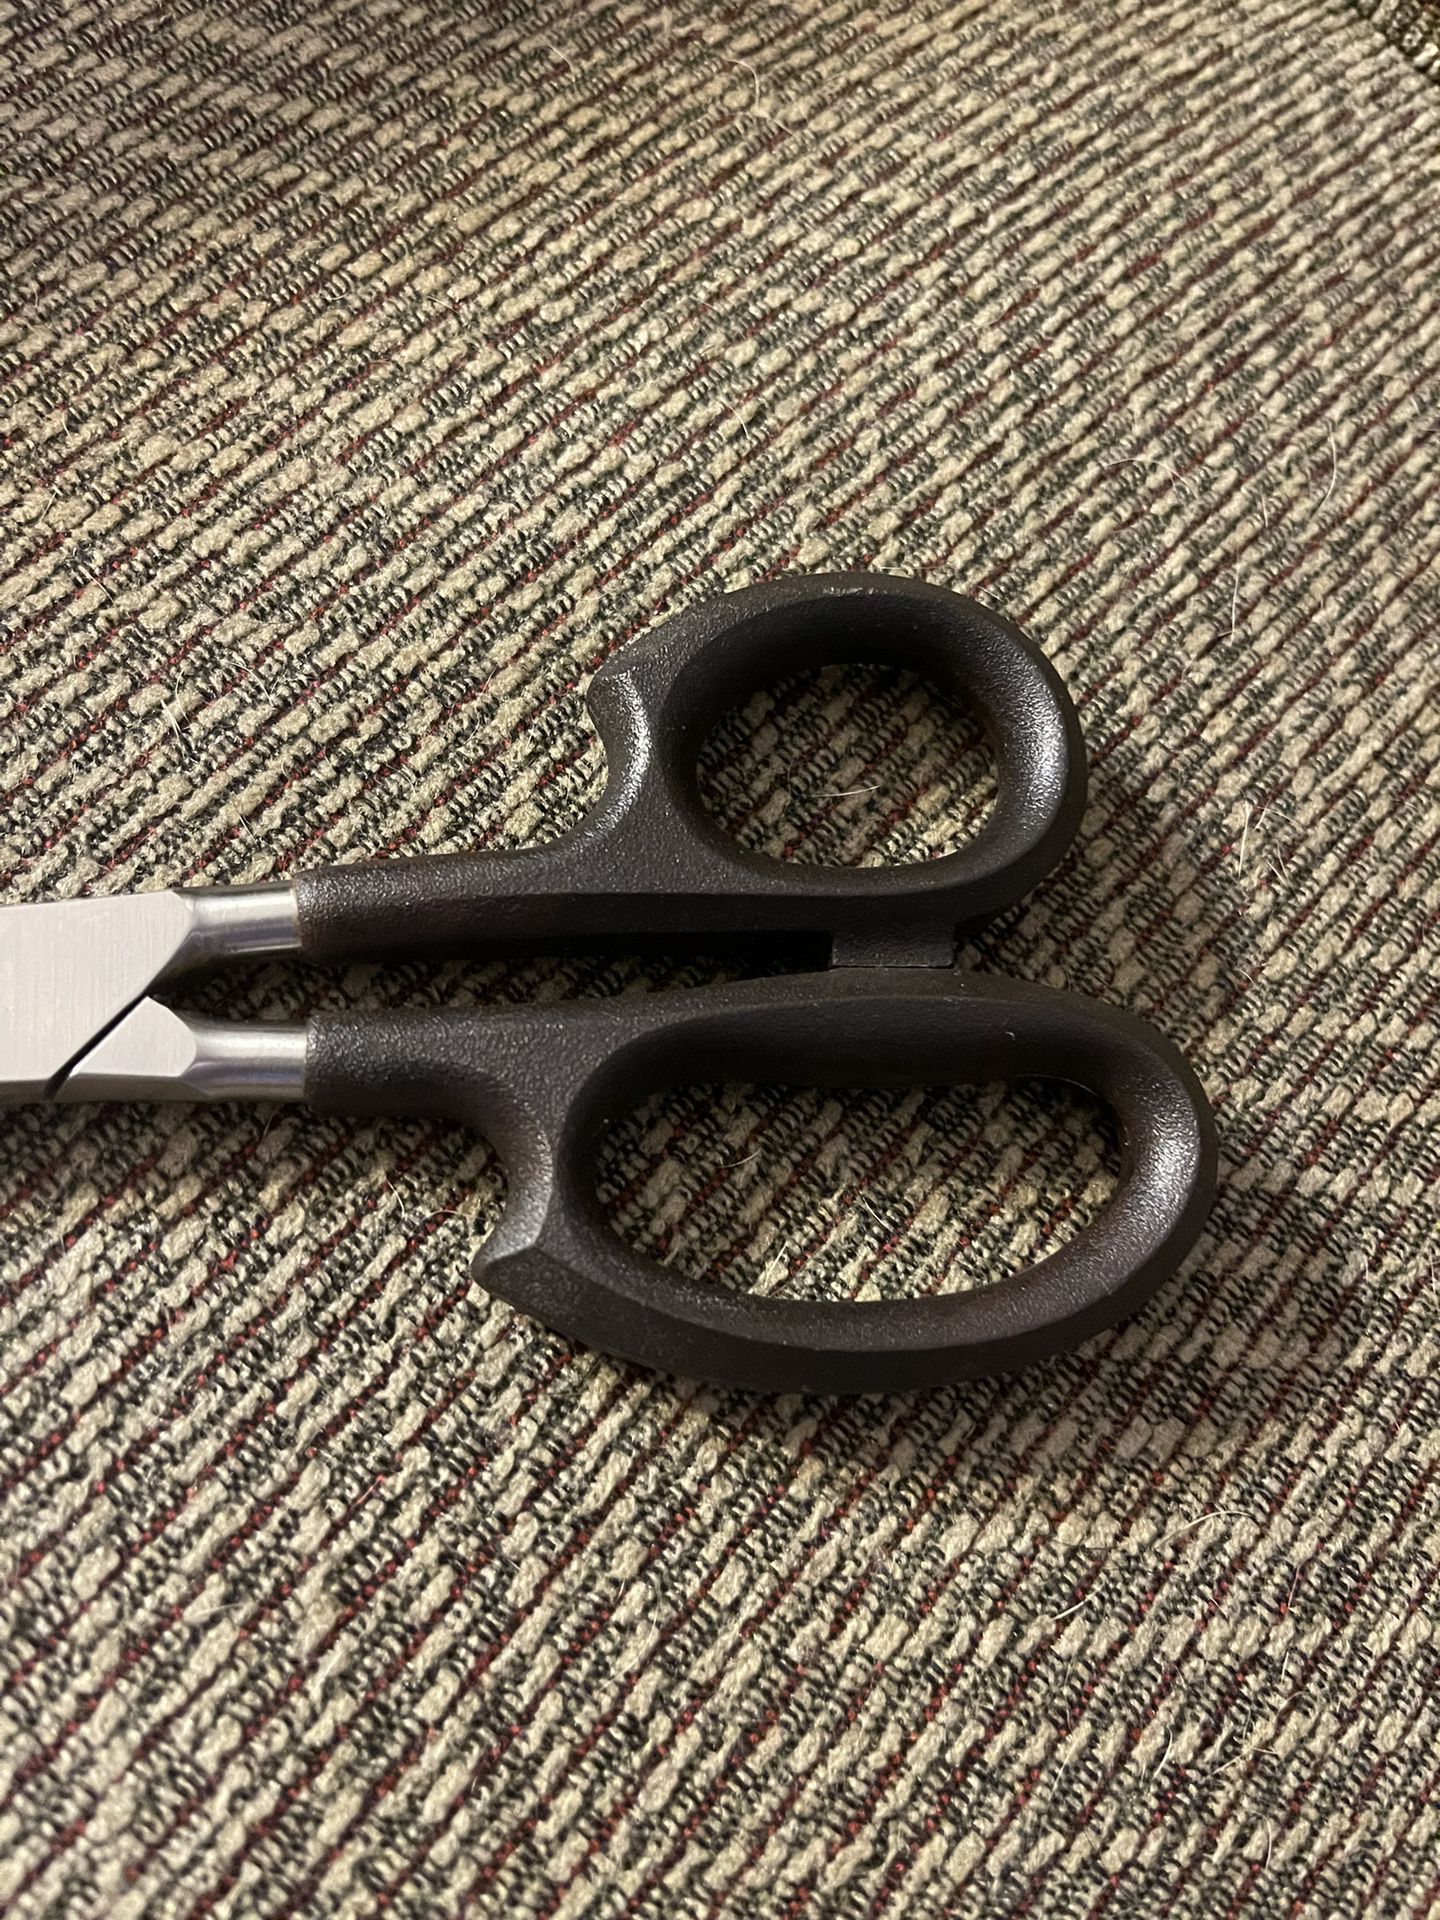 Crazy Scissors Set #002 for Sale in Chicago, IL - OfferUp